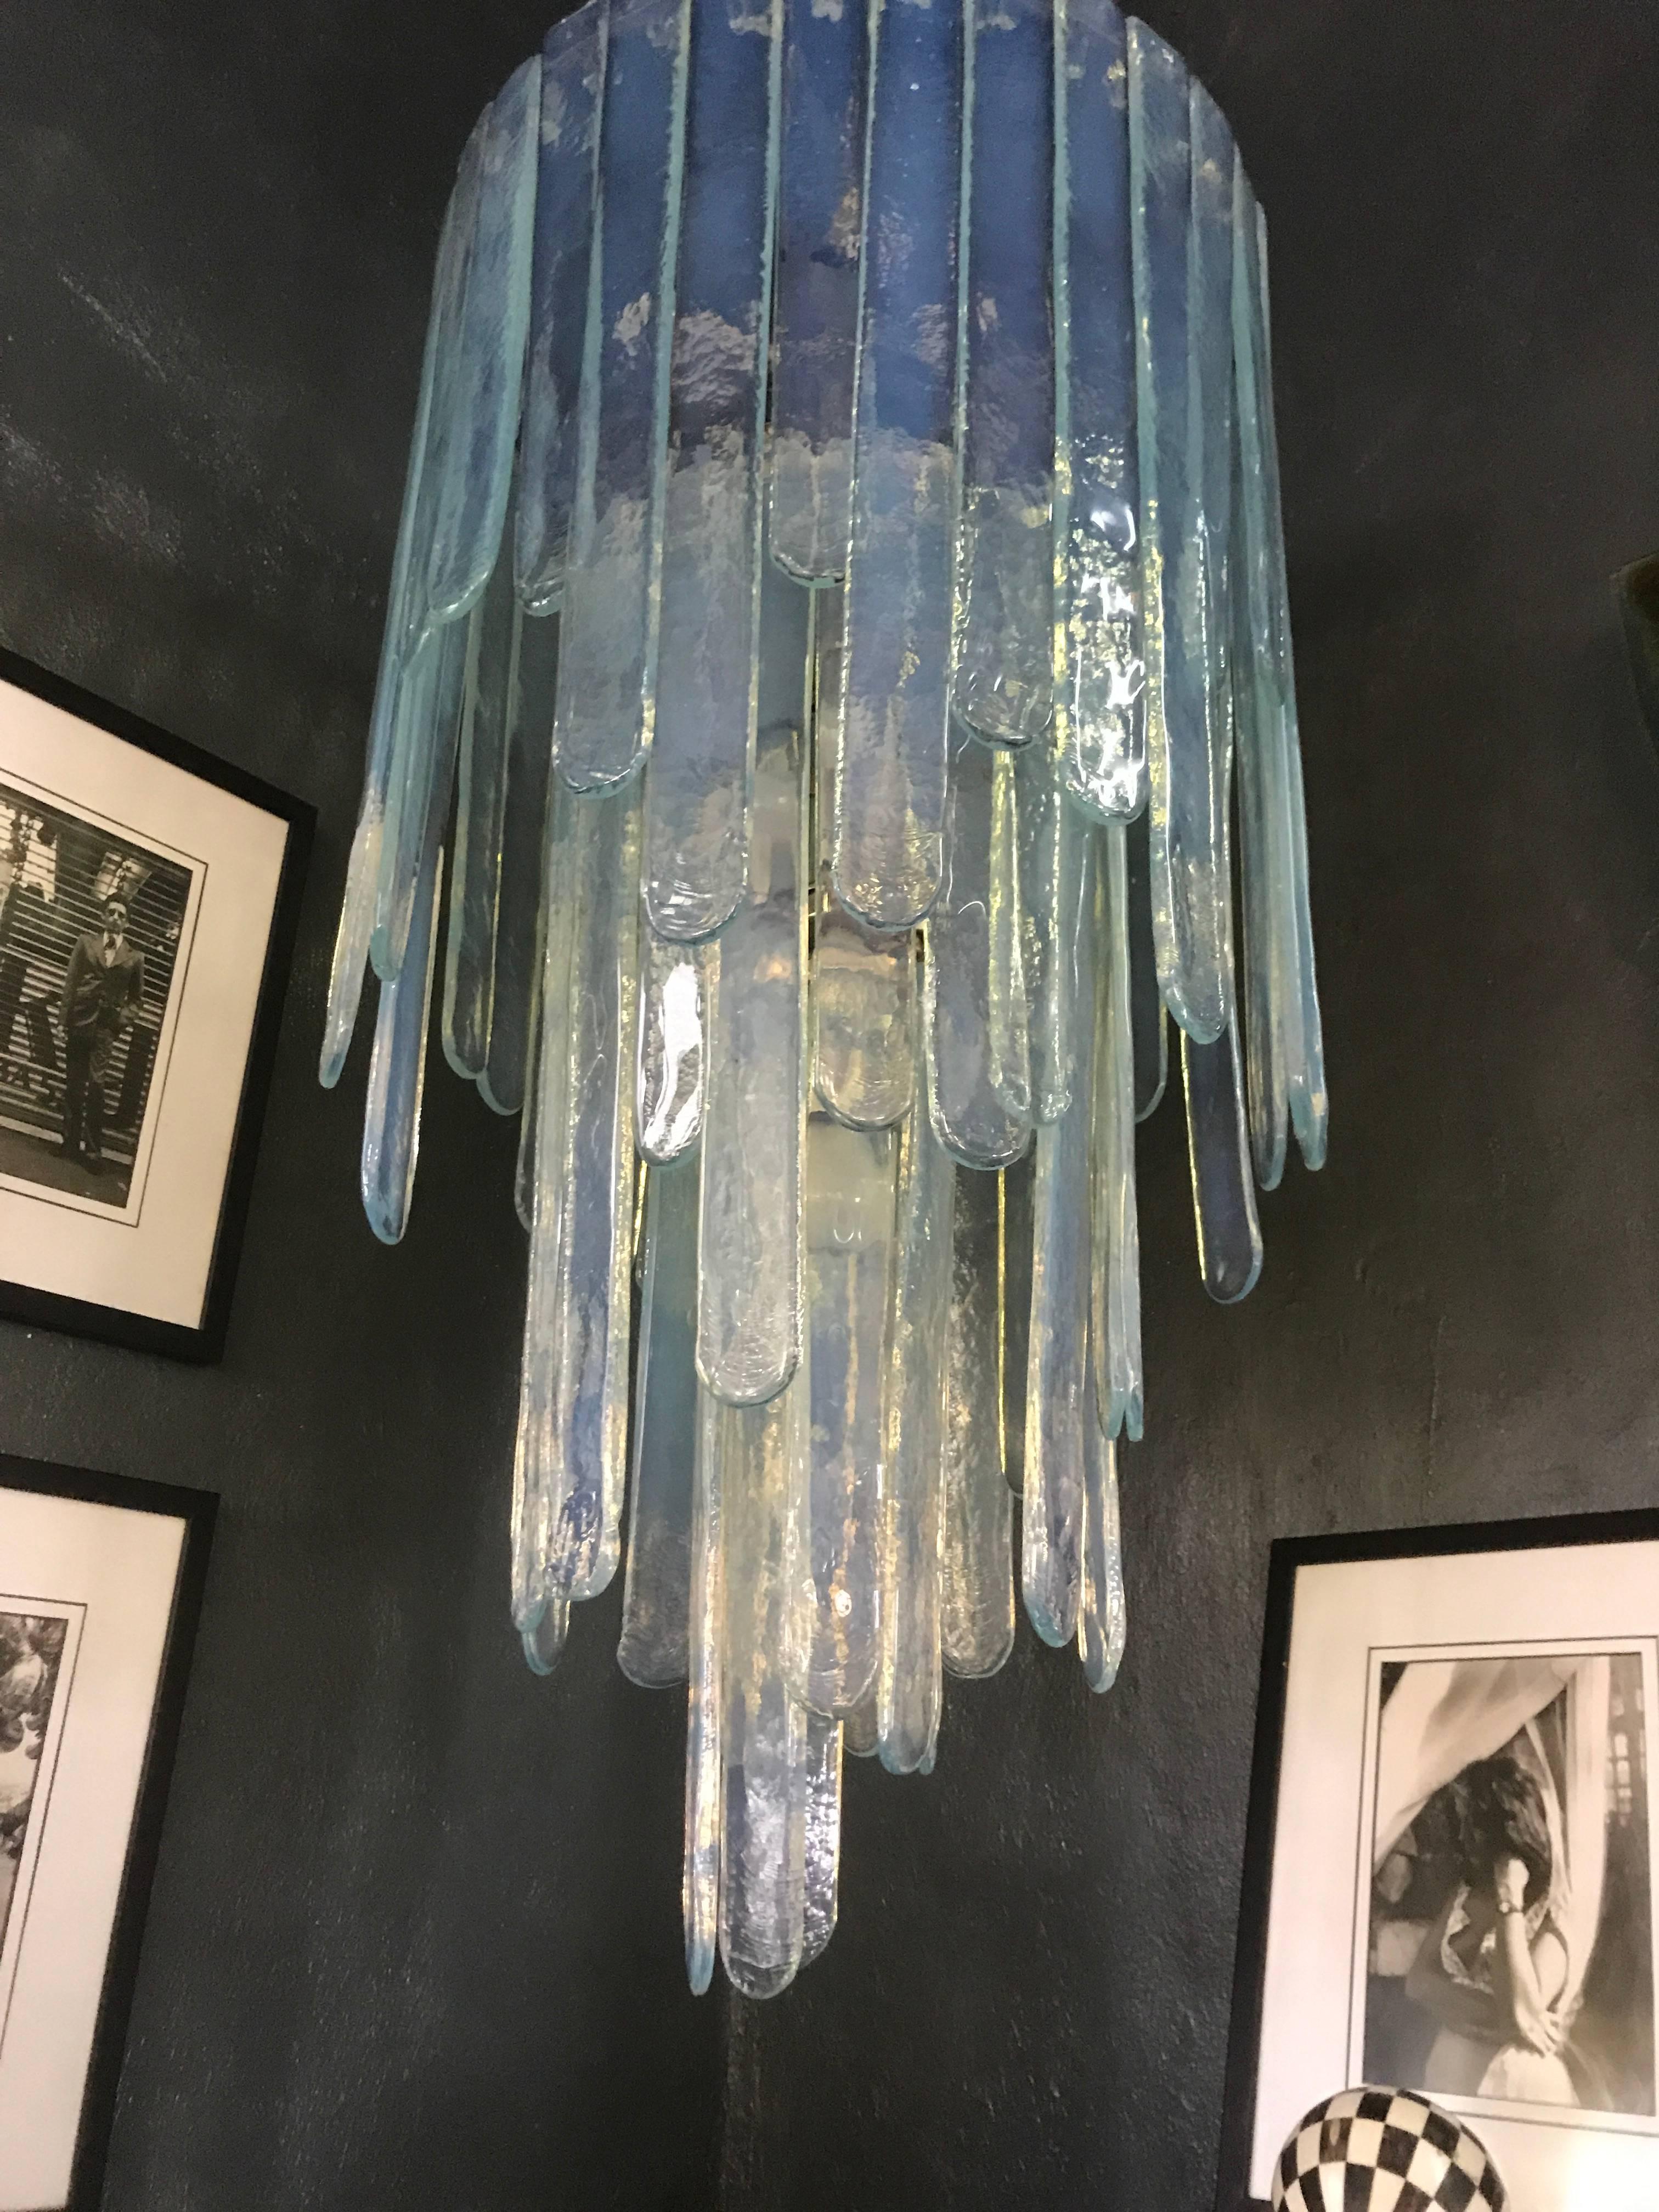 Mid-Century Modern chandelier by Carlo Nason for Mazzega in a blue opalescent hue, consisting of three stages of glass blades. This chandelier is complete as there is not one inch of space free where the blades hang from. It measures 108 cm tall in